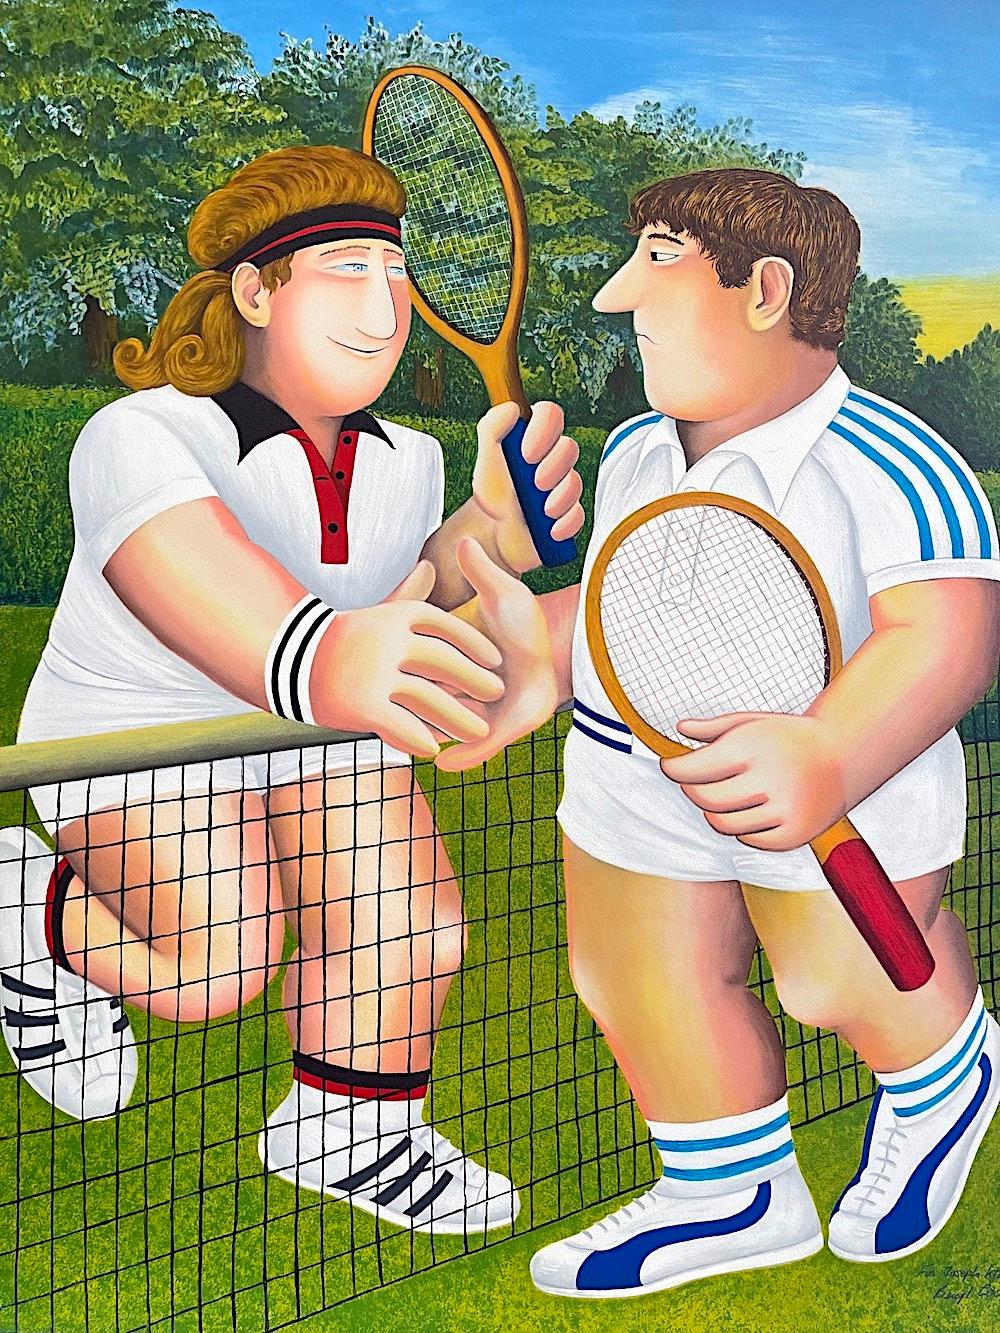 TENNIS Signed Lithograph, Tennis Match Borg vs. Connors Rivalry, British Humor